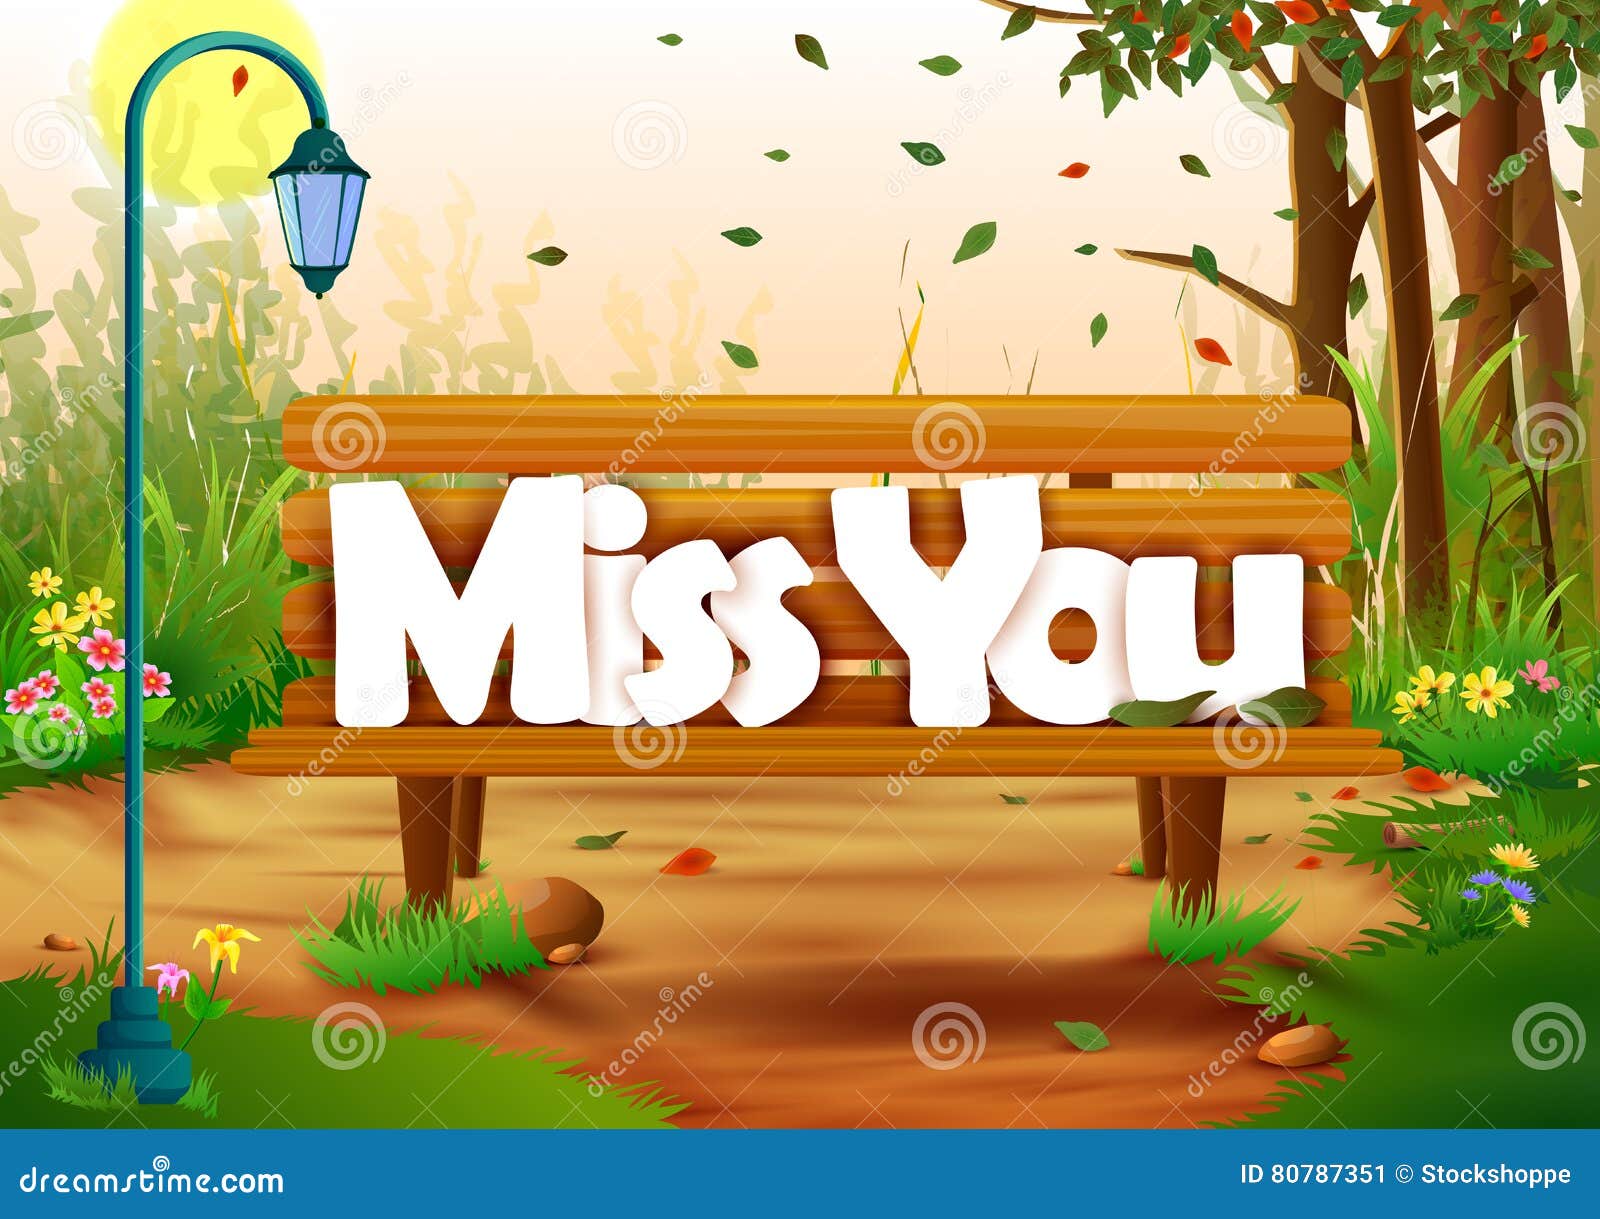 miss you wallpaper background